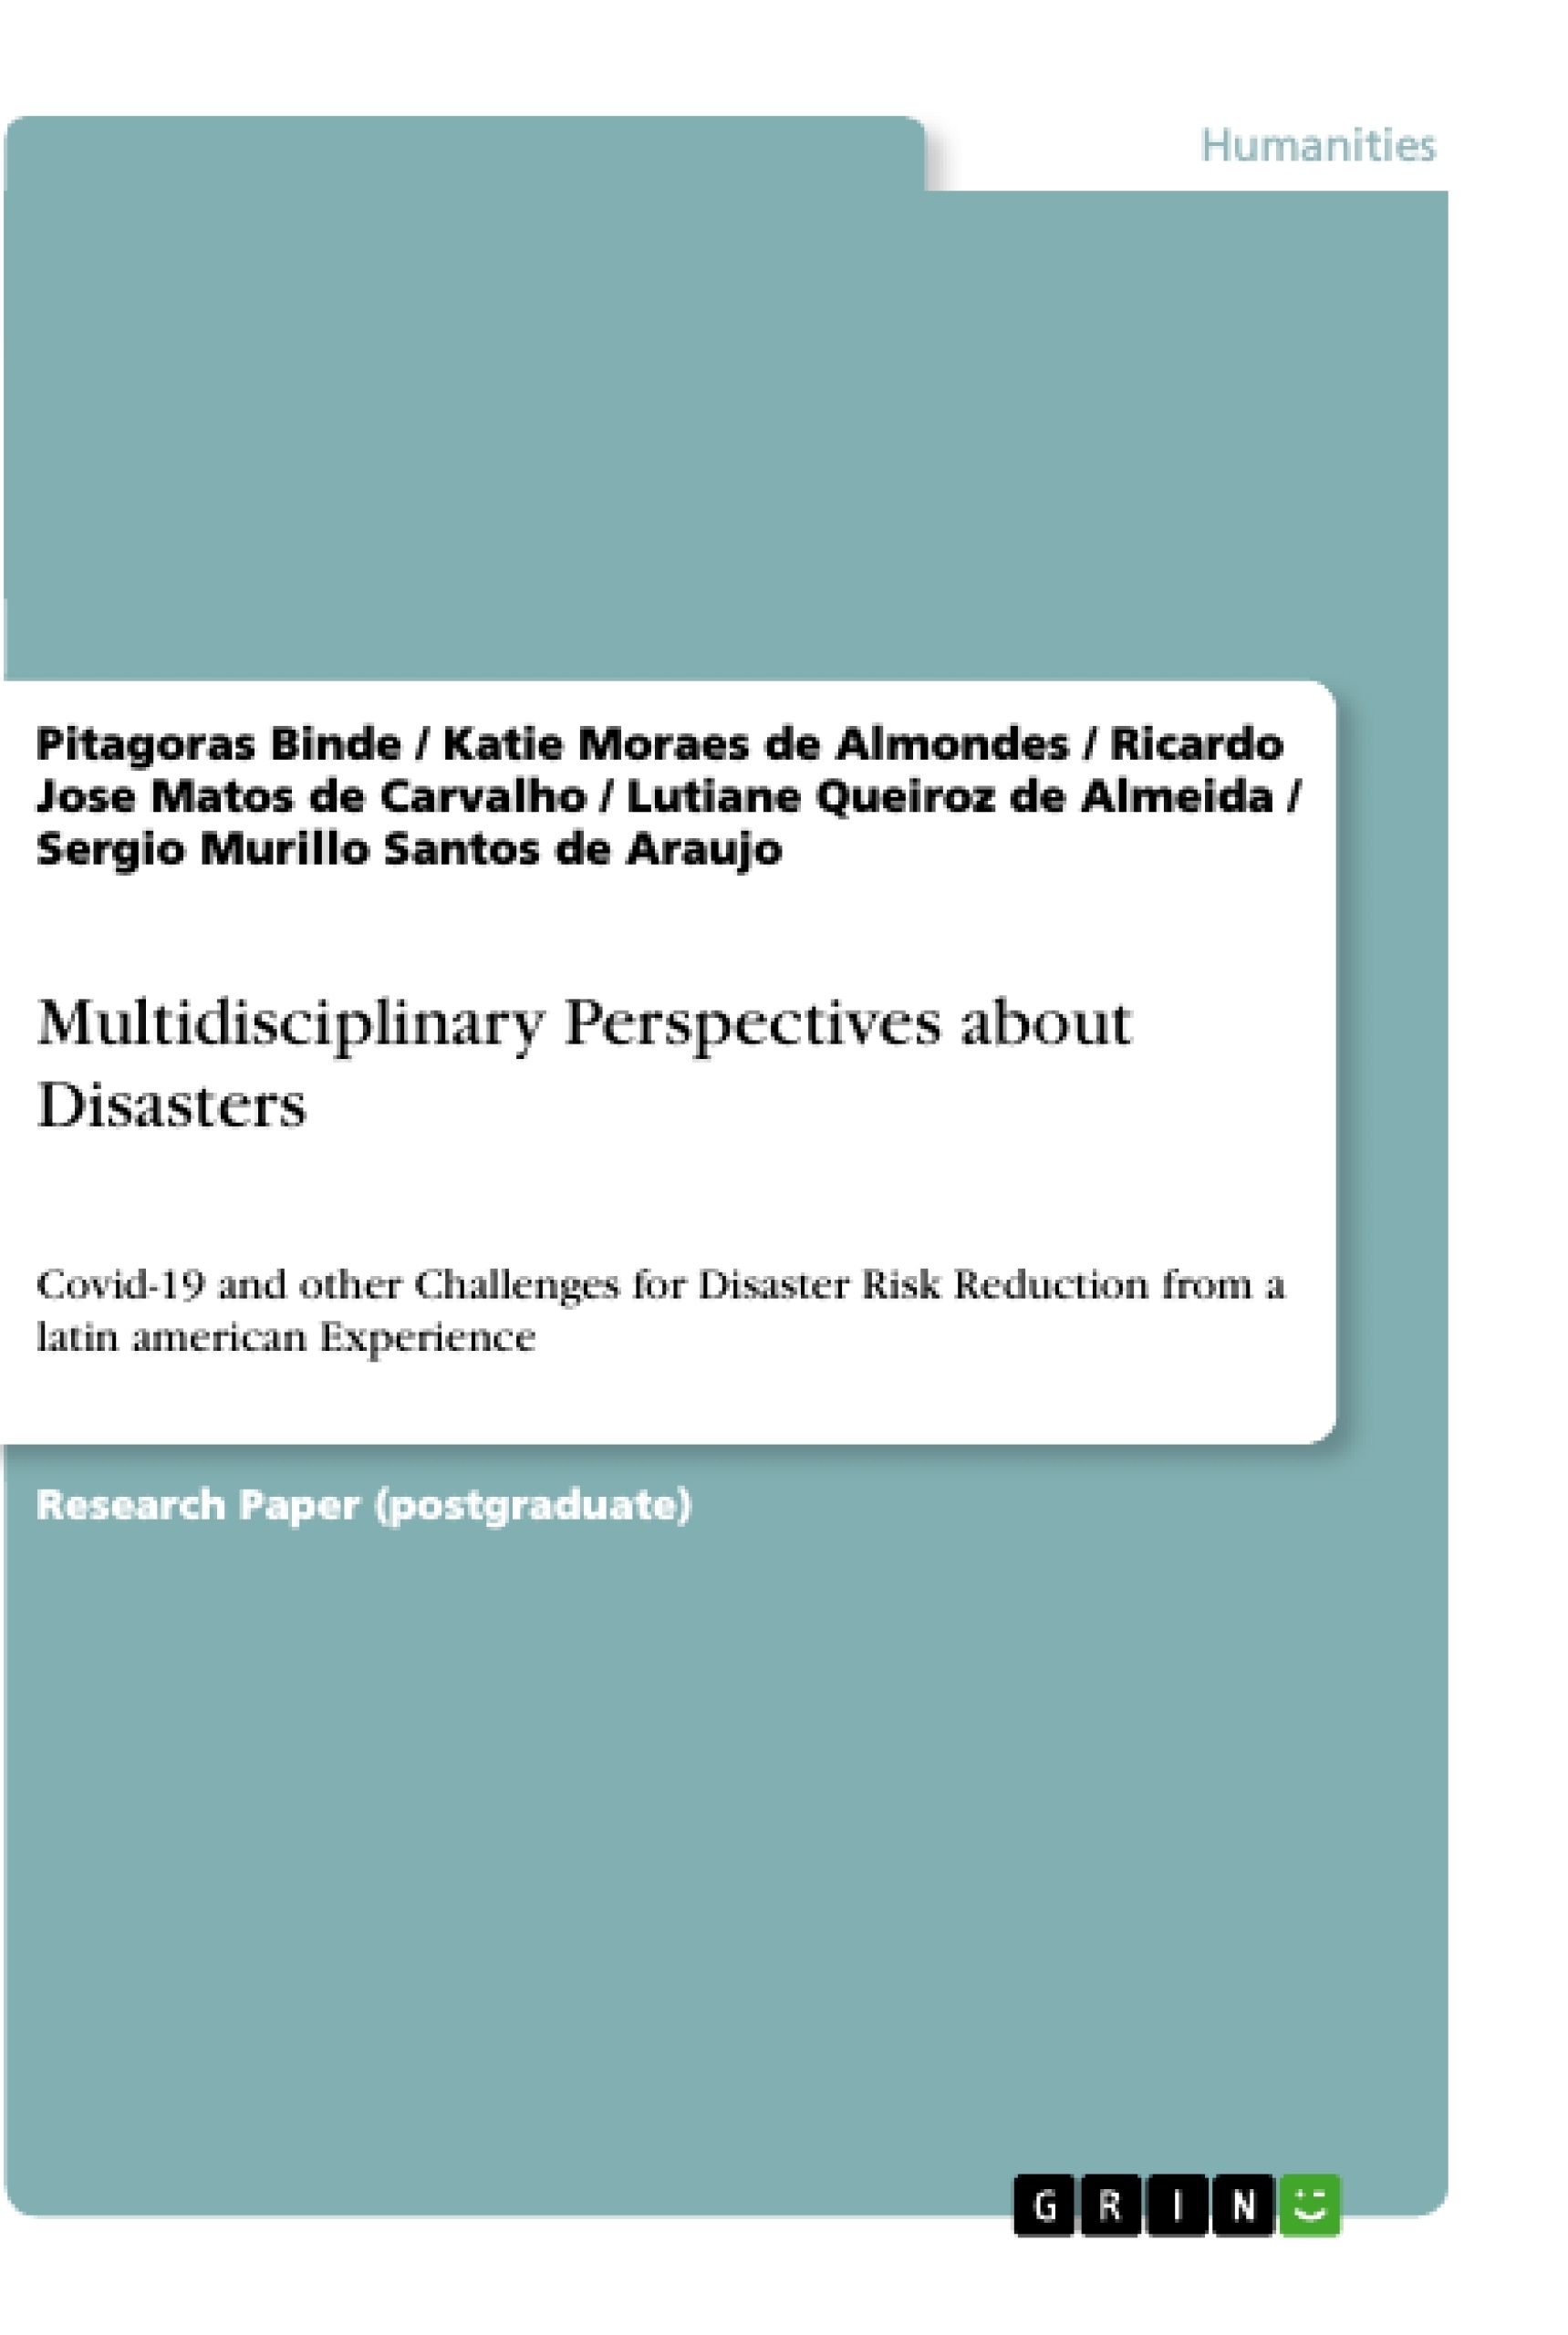 Title: Multidisciplinary Perspectives about Disasters